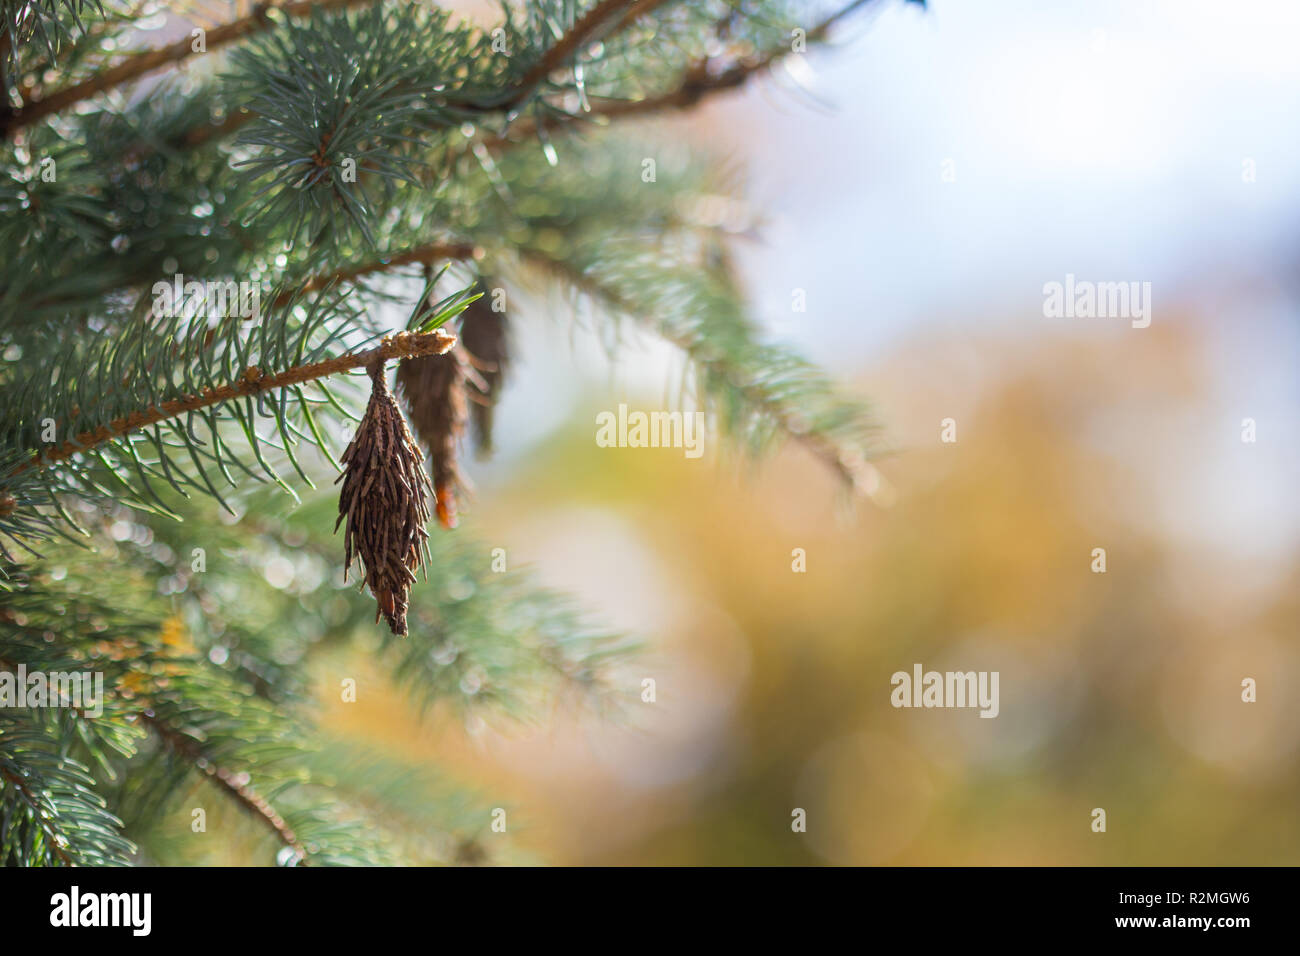 Bagworm bags on a coniferous tree, Crystal City Water Park, Arlington, Virginia, United States Stock Photo